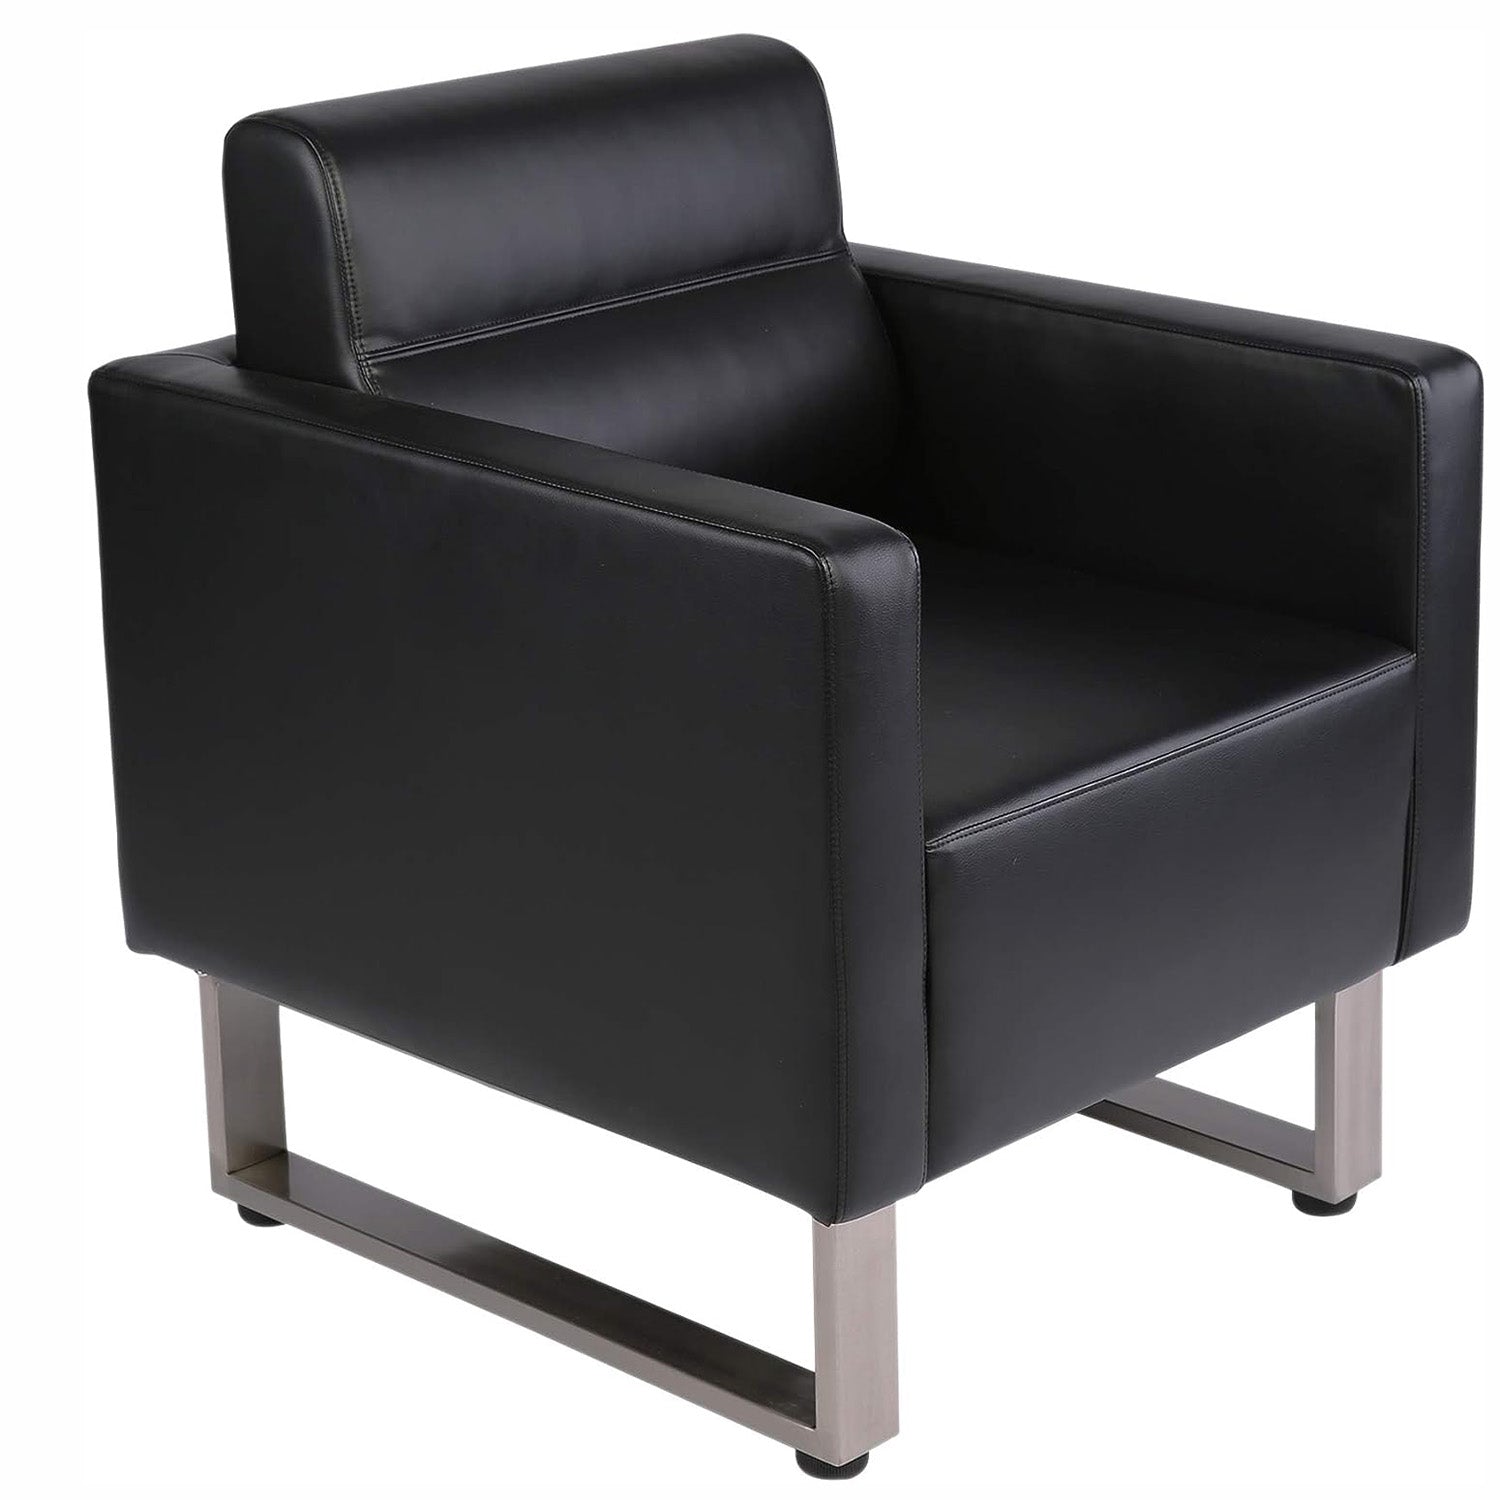 LUCKYERMORE Guest Chair Office Reception Chair Leather Sofa Chairs with PU Leather Soft Sponge, Black